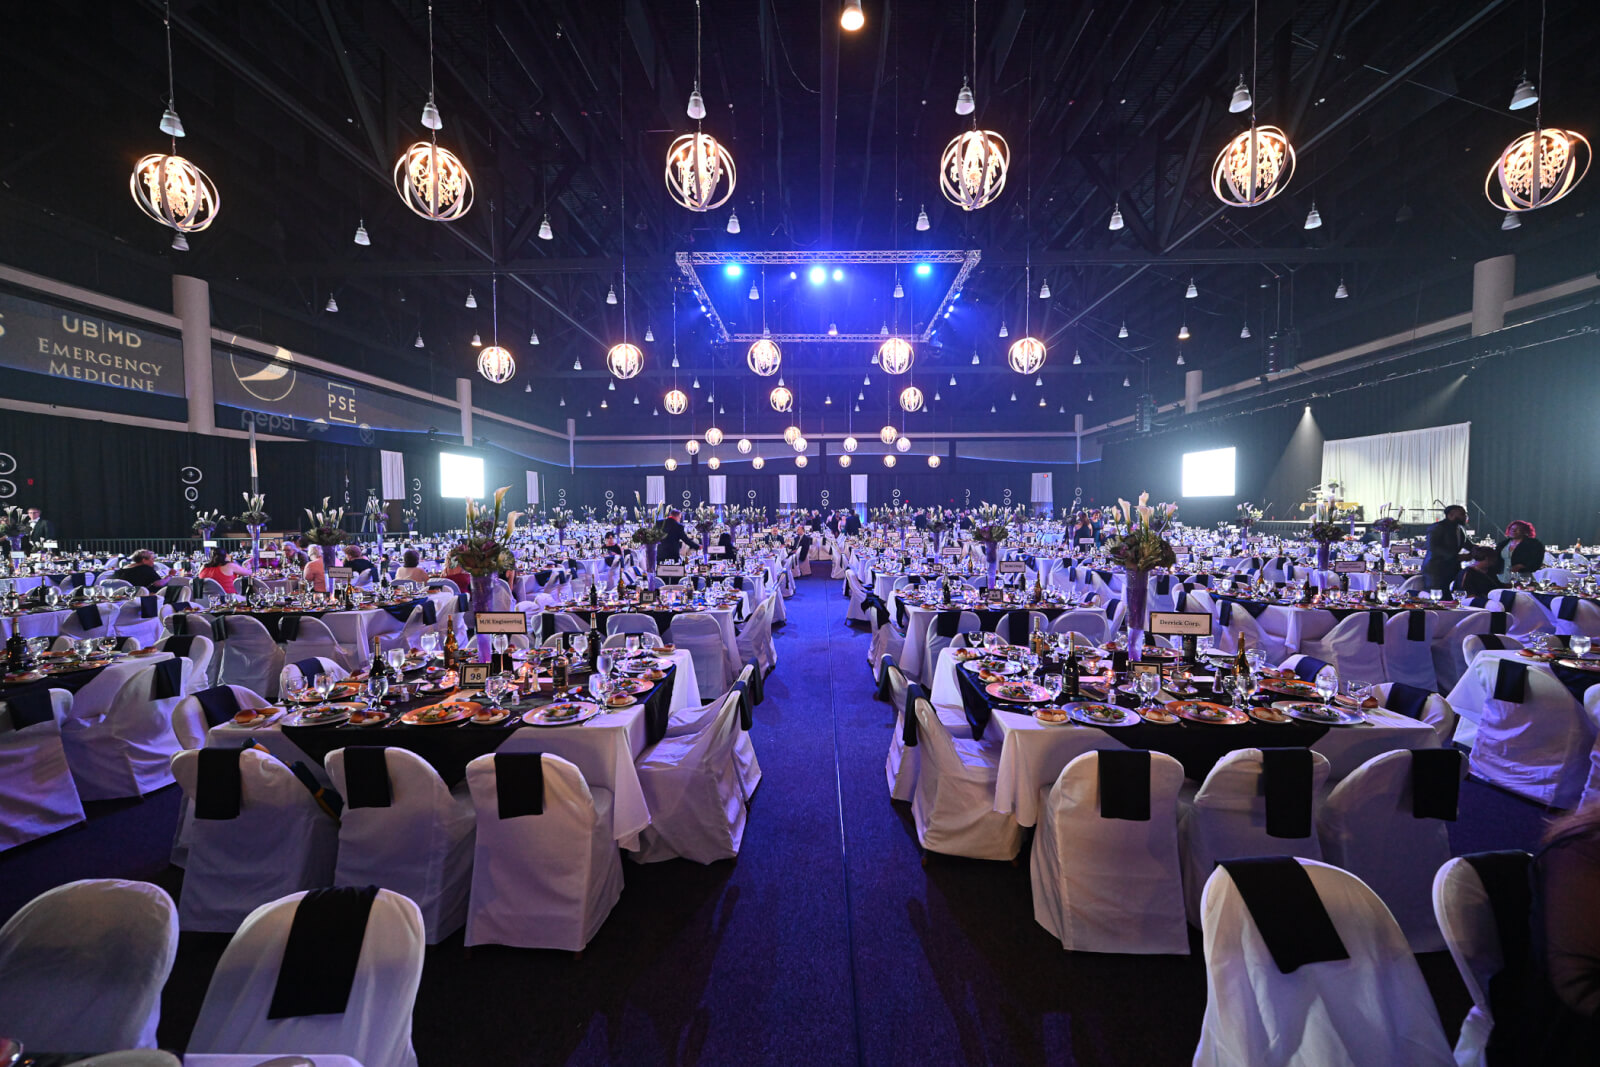 A large ballroom is set for a formal dinner, complete with while chair covers and hanging light medallions.